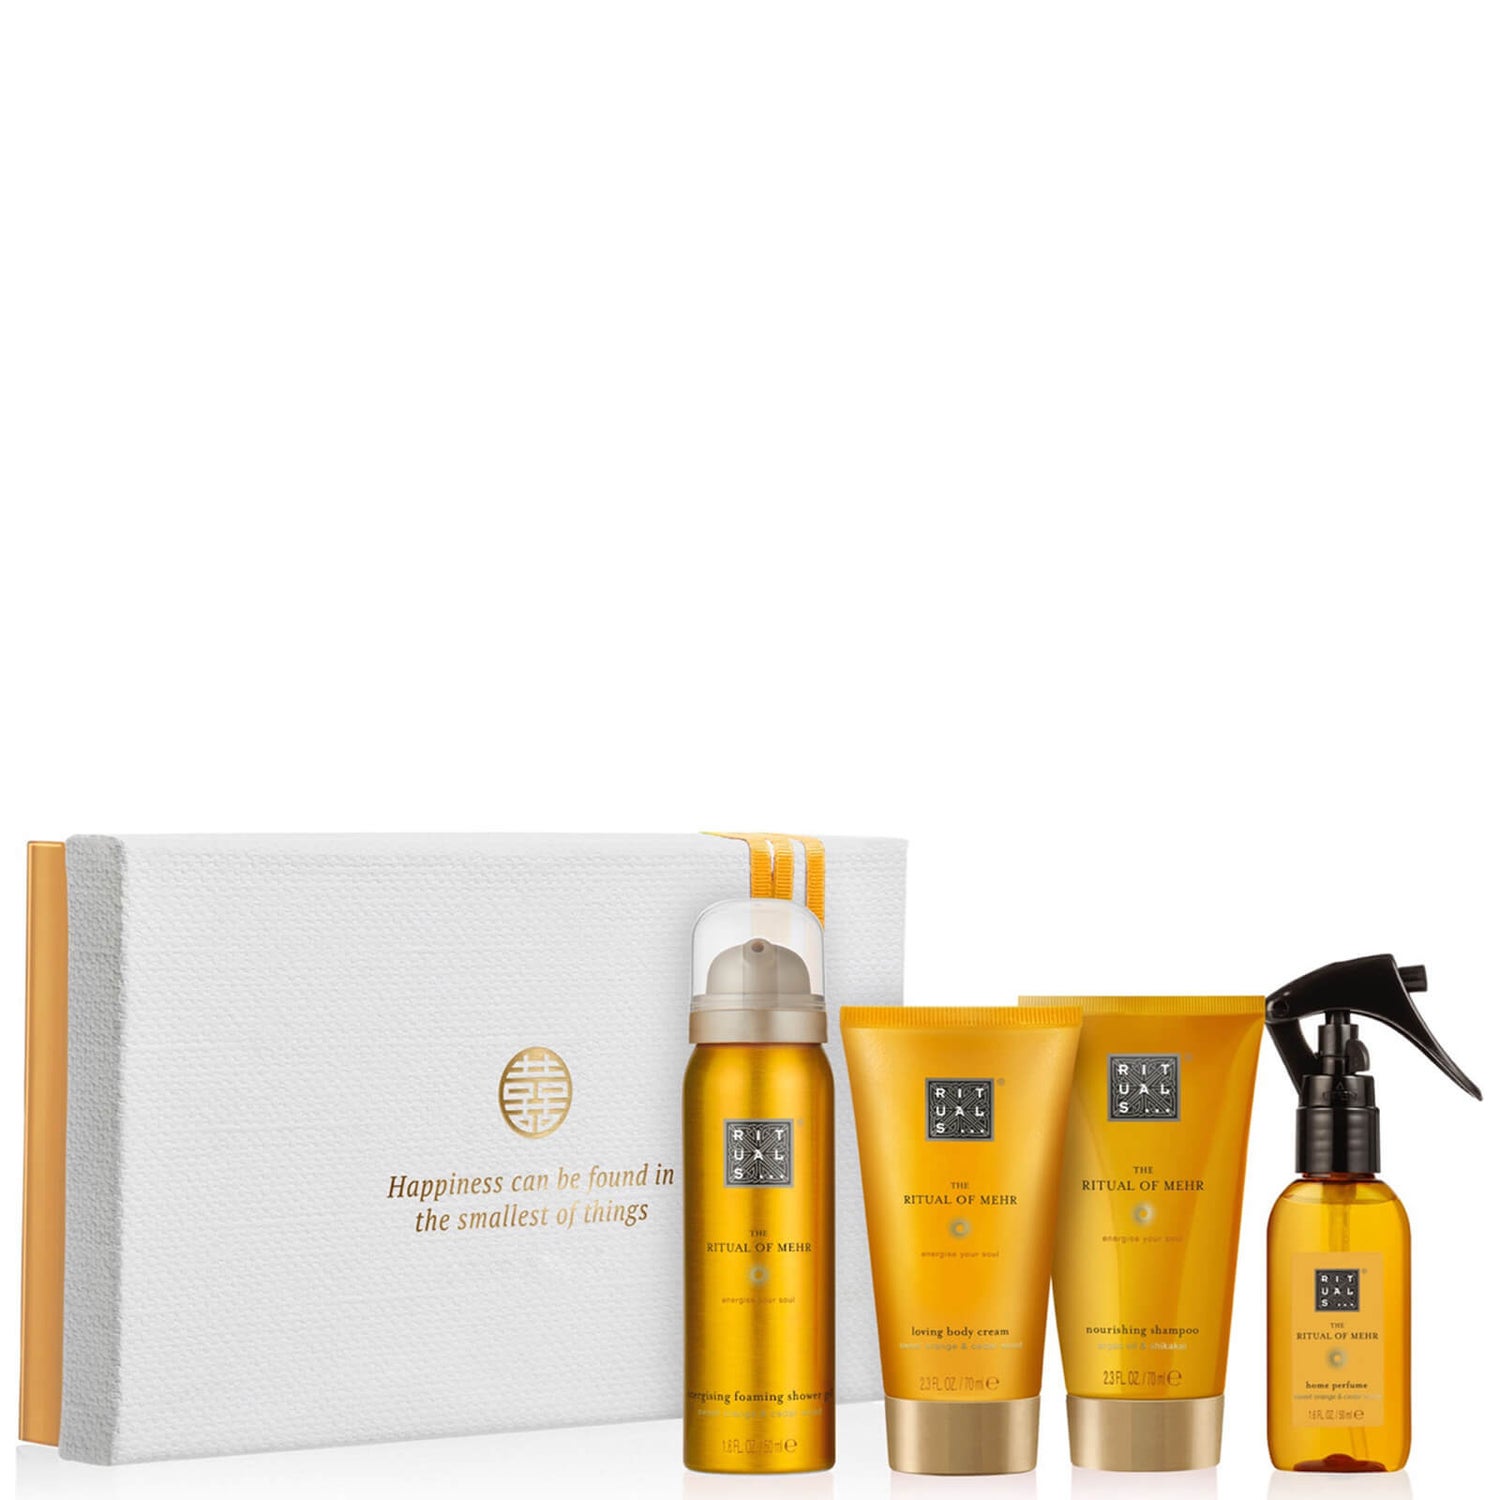 Buy Rituals The Ritual of Mehr Mini Body Care Set online at a great price